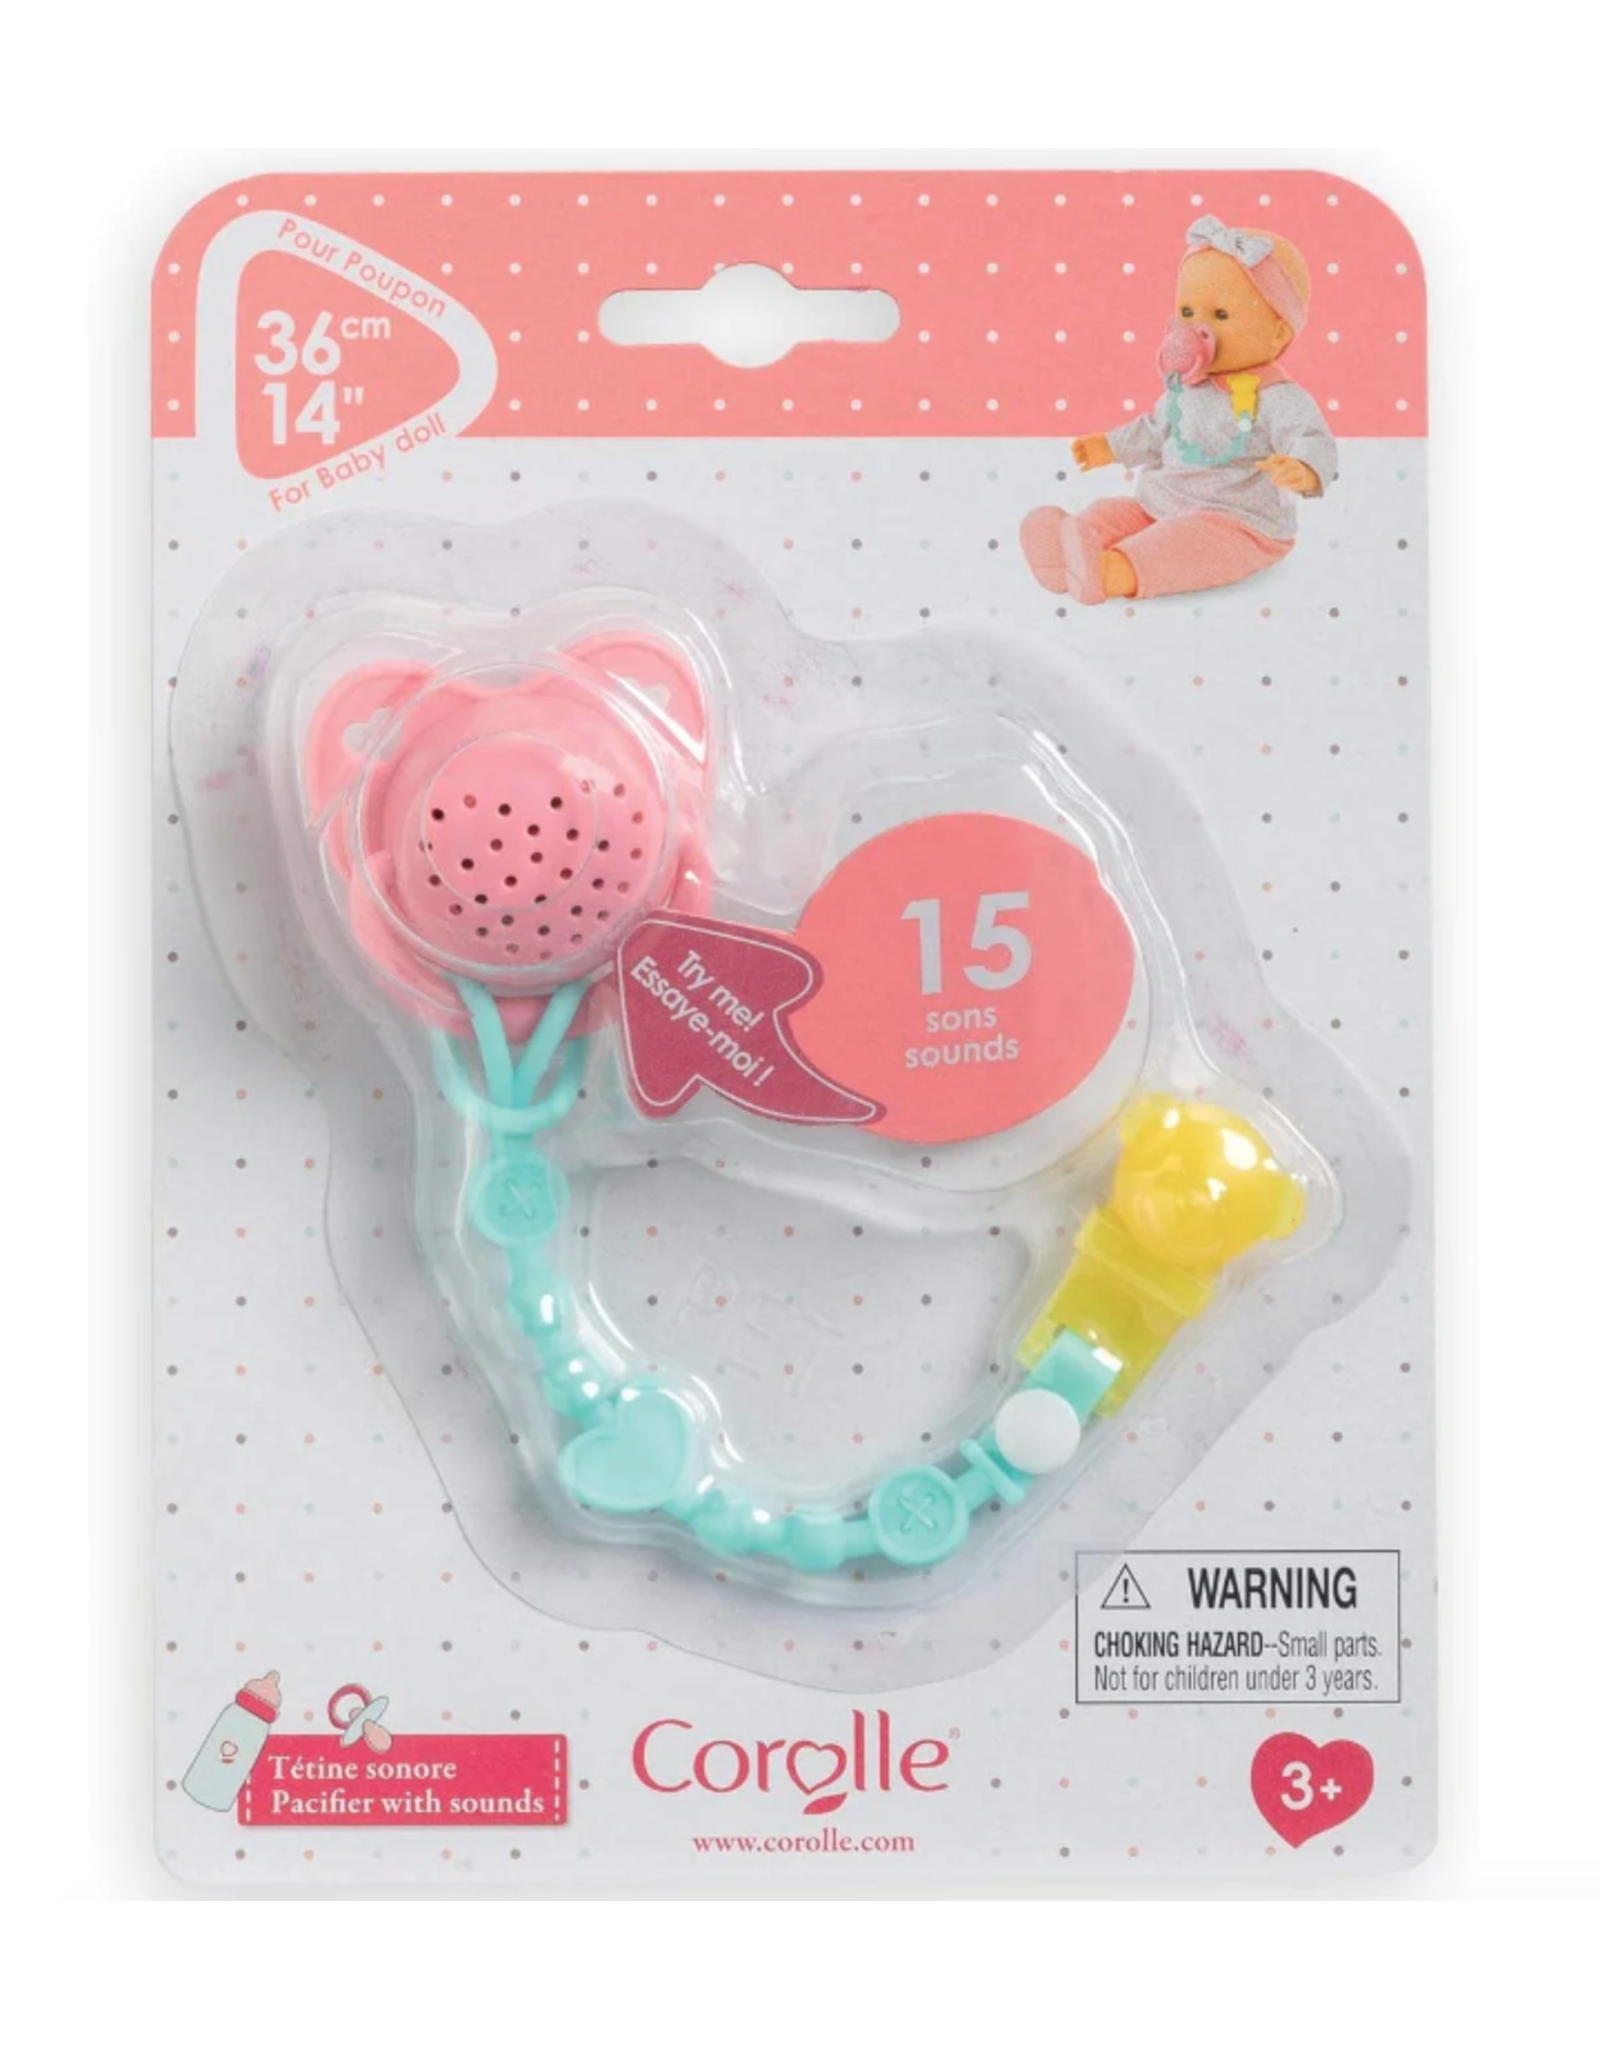 Corolle 14" Doll Pacifier with Sounds